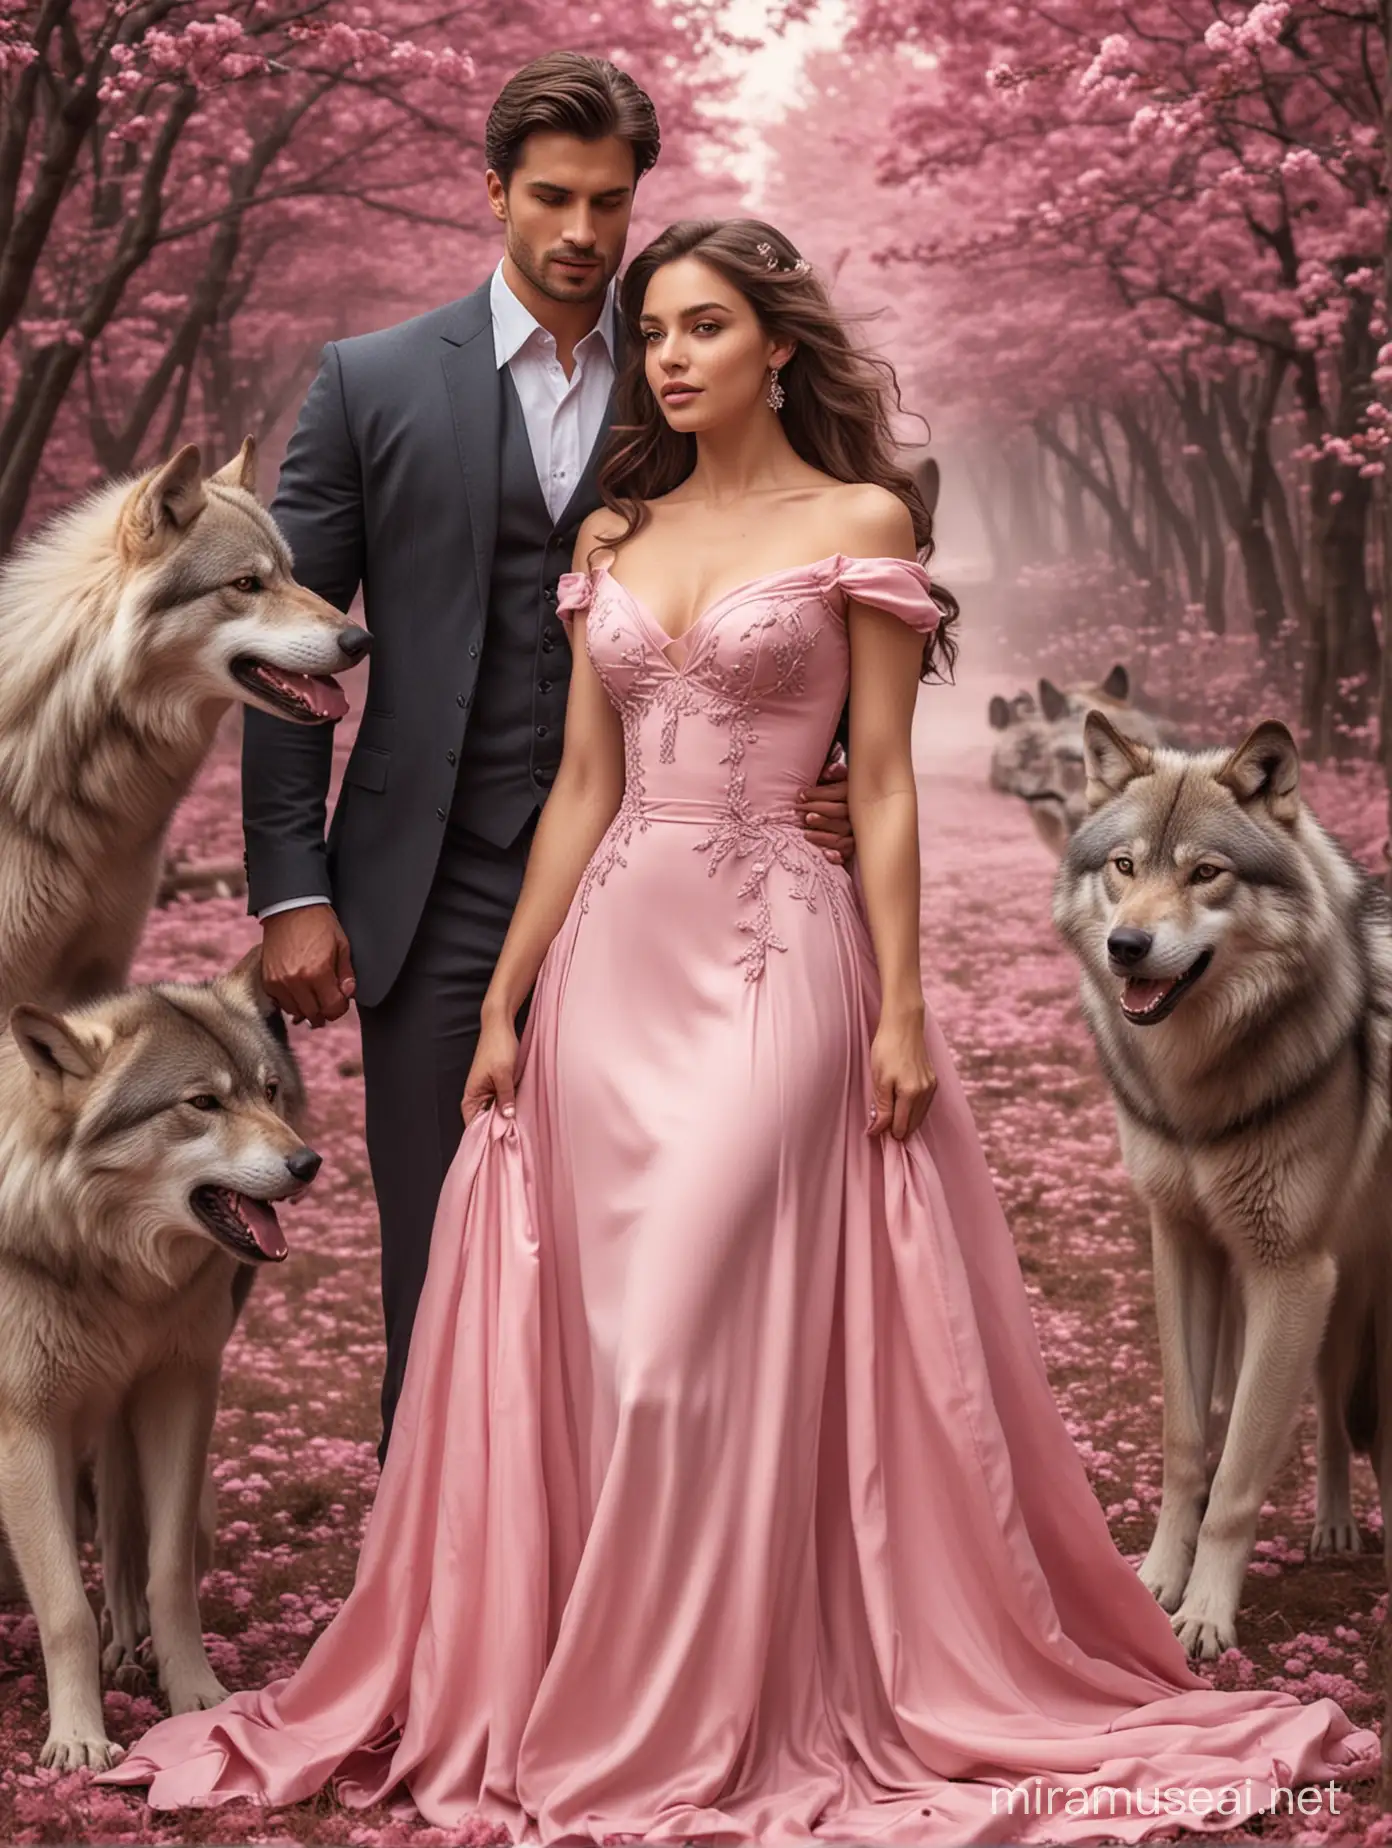 A beautiful lady in a fitted pink dress, held romantically from the waist by a handsome hot man, with wolves around them